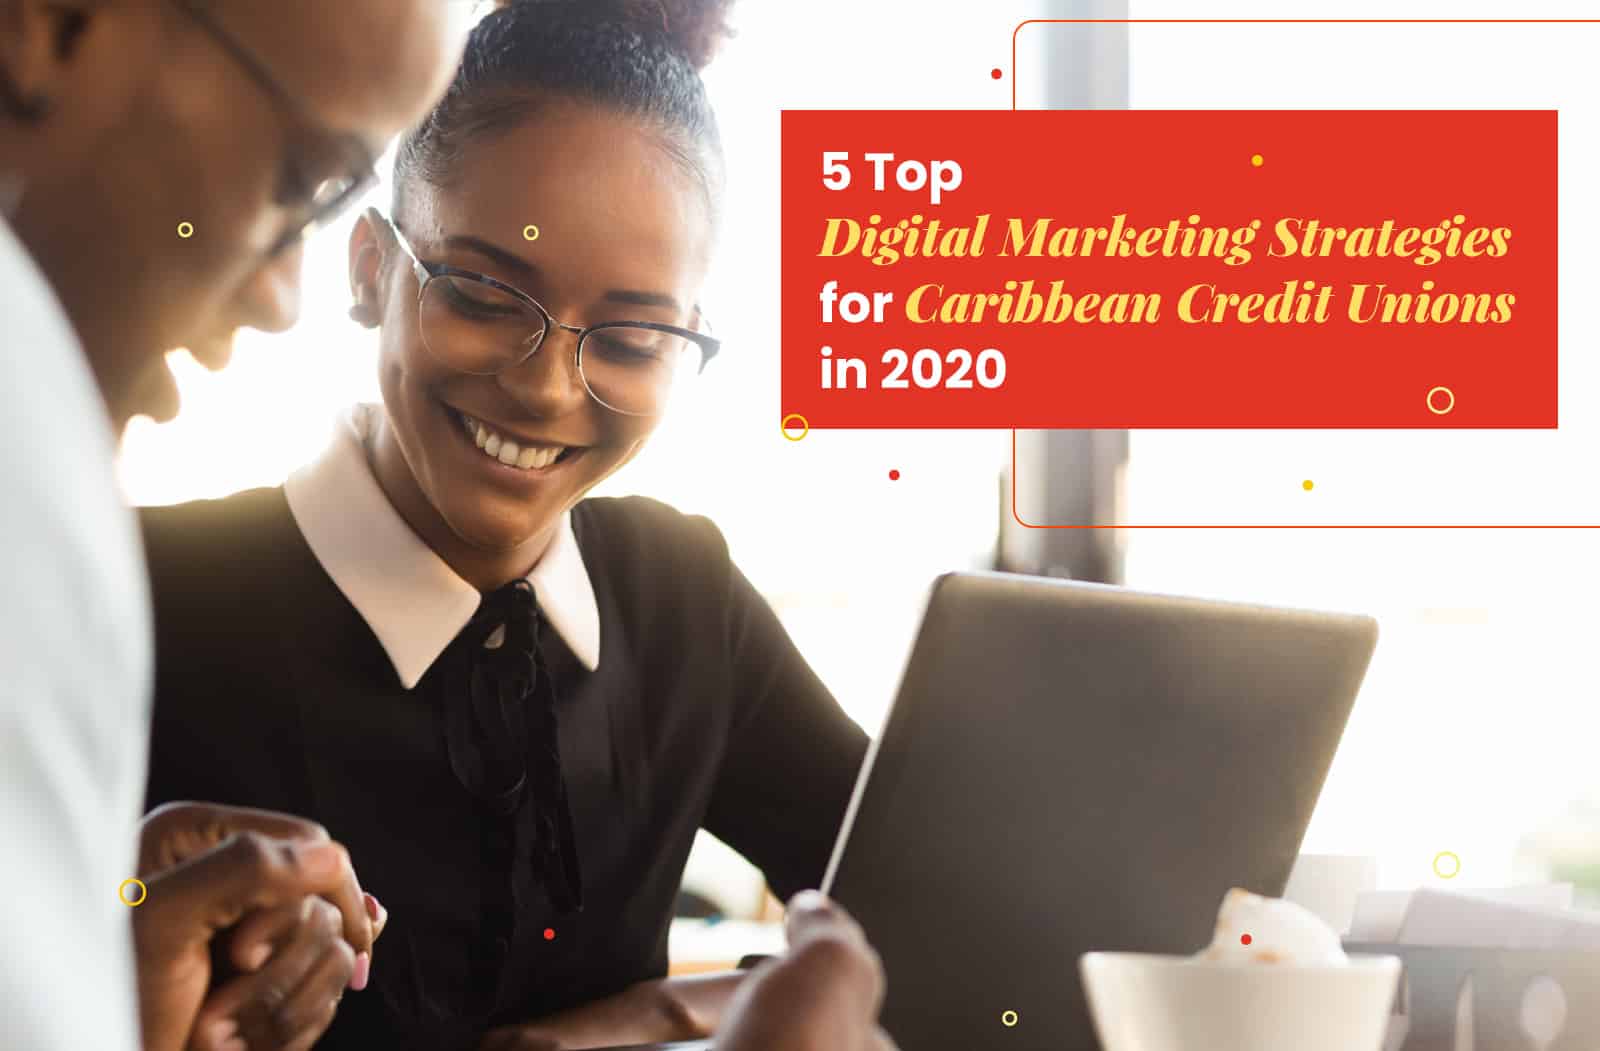 Digital Marketing for Credit Unions in the Caribbean